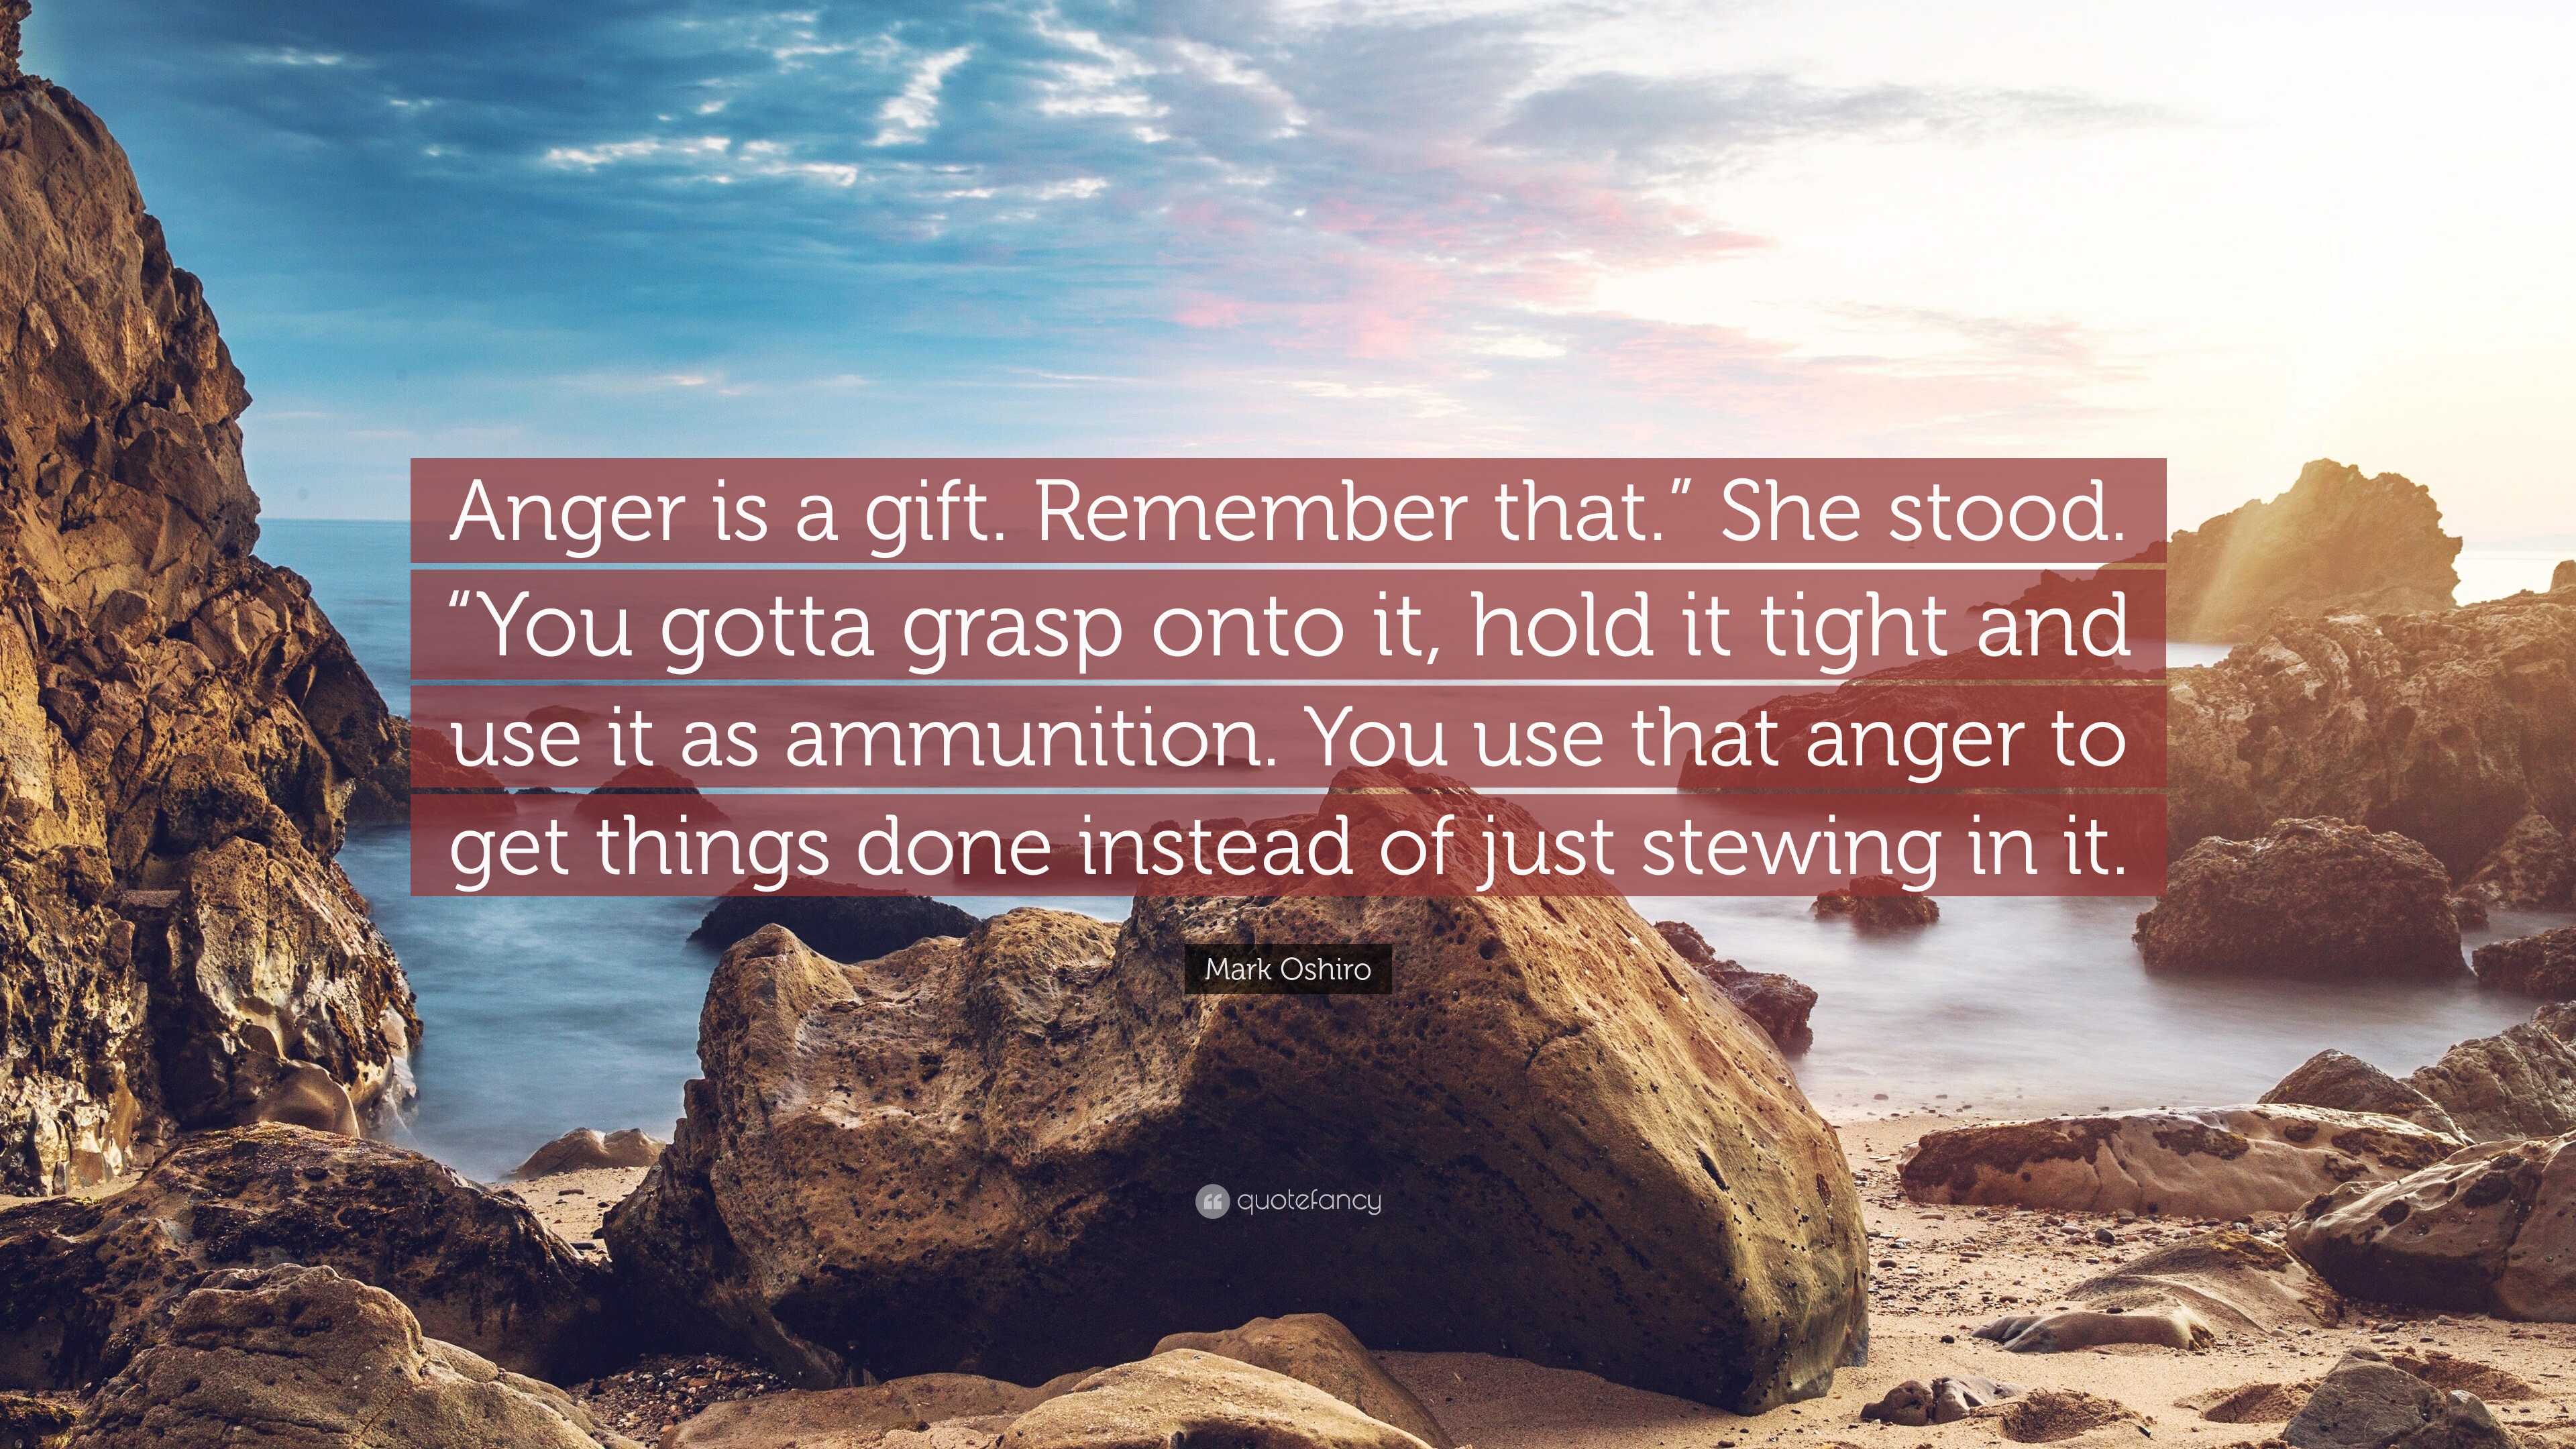 Anger Is a Gift Author Mark Oshiro Answers Rapid Fire Questions! - Tor Teen